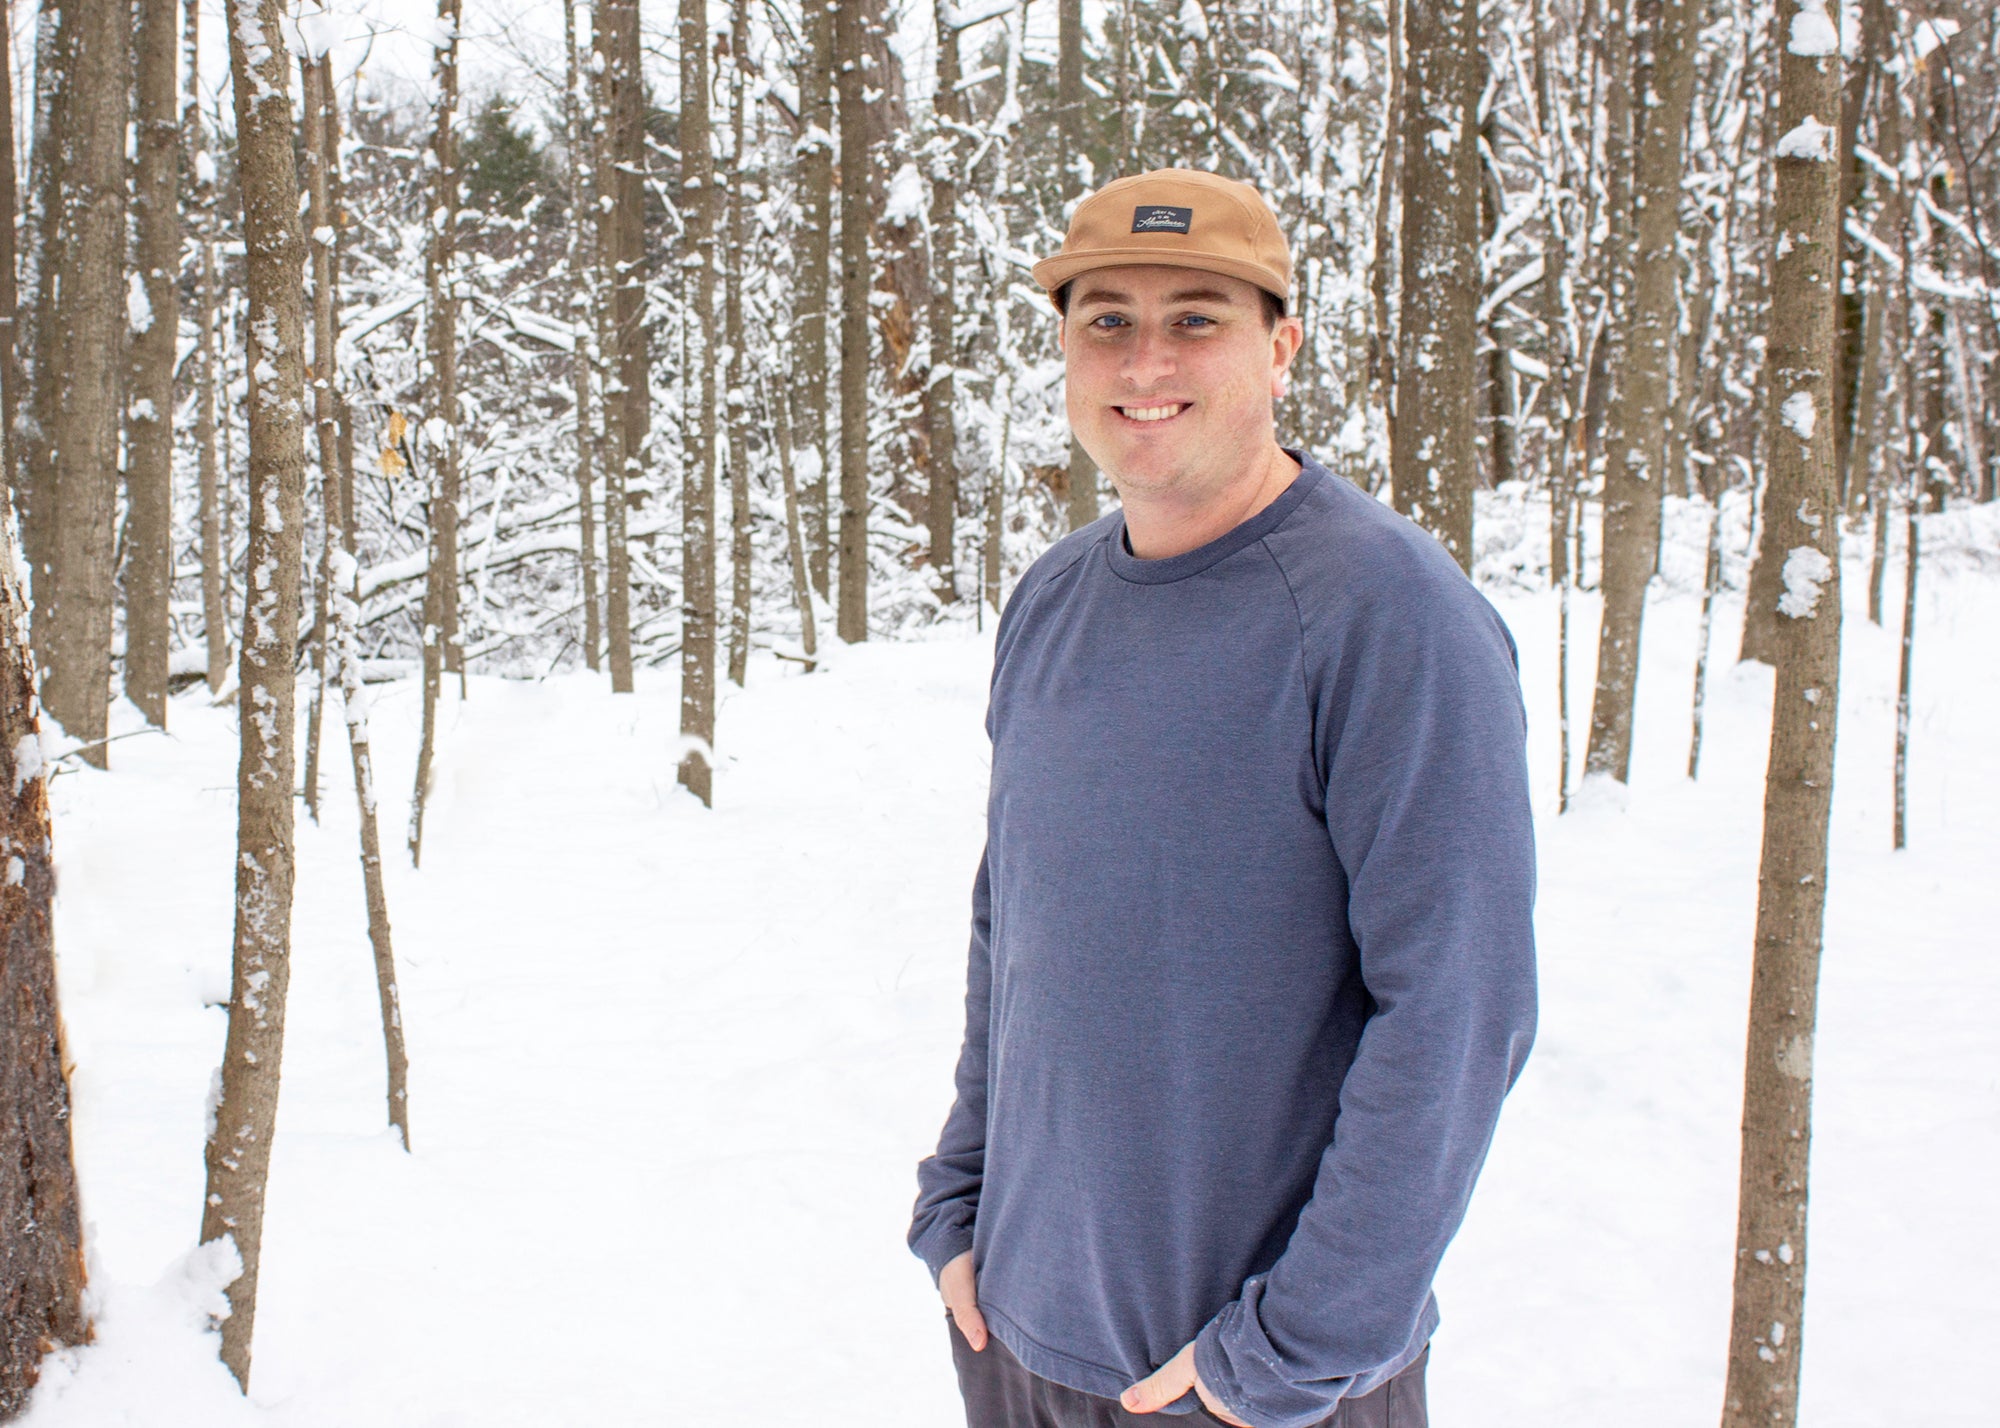 Kevin Sherry standing in a wooded area with snow on the ground